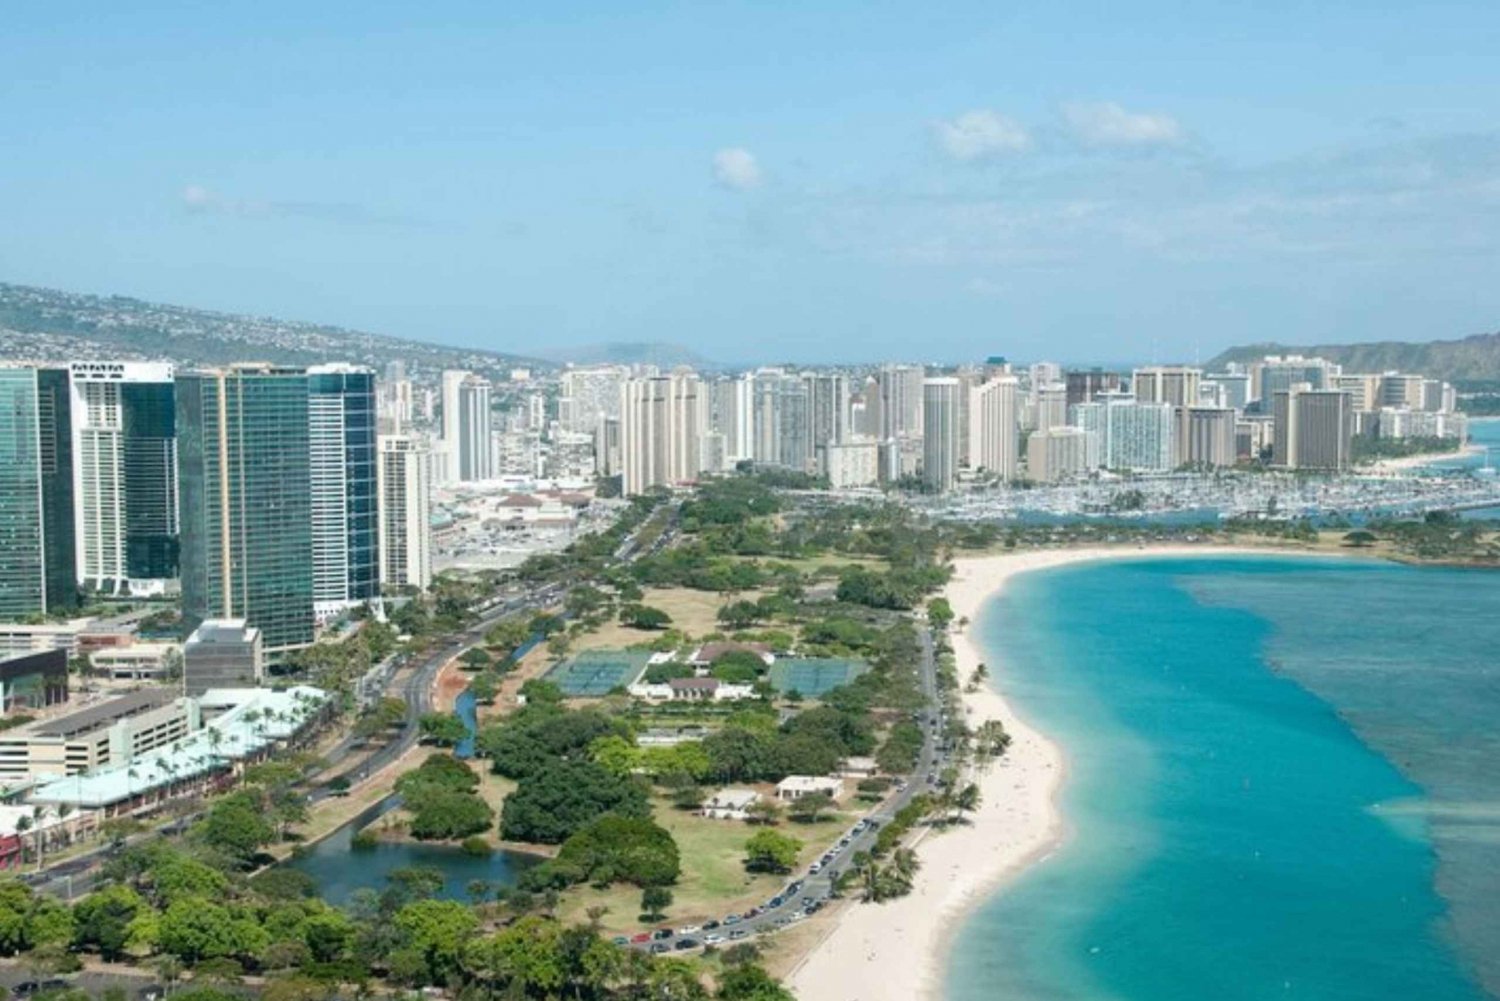 Honolulu: Private custom tour with a local guide